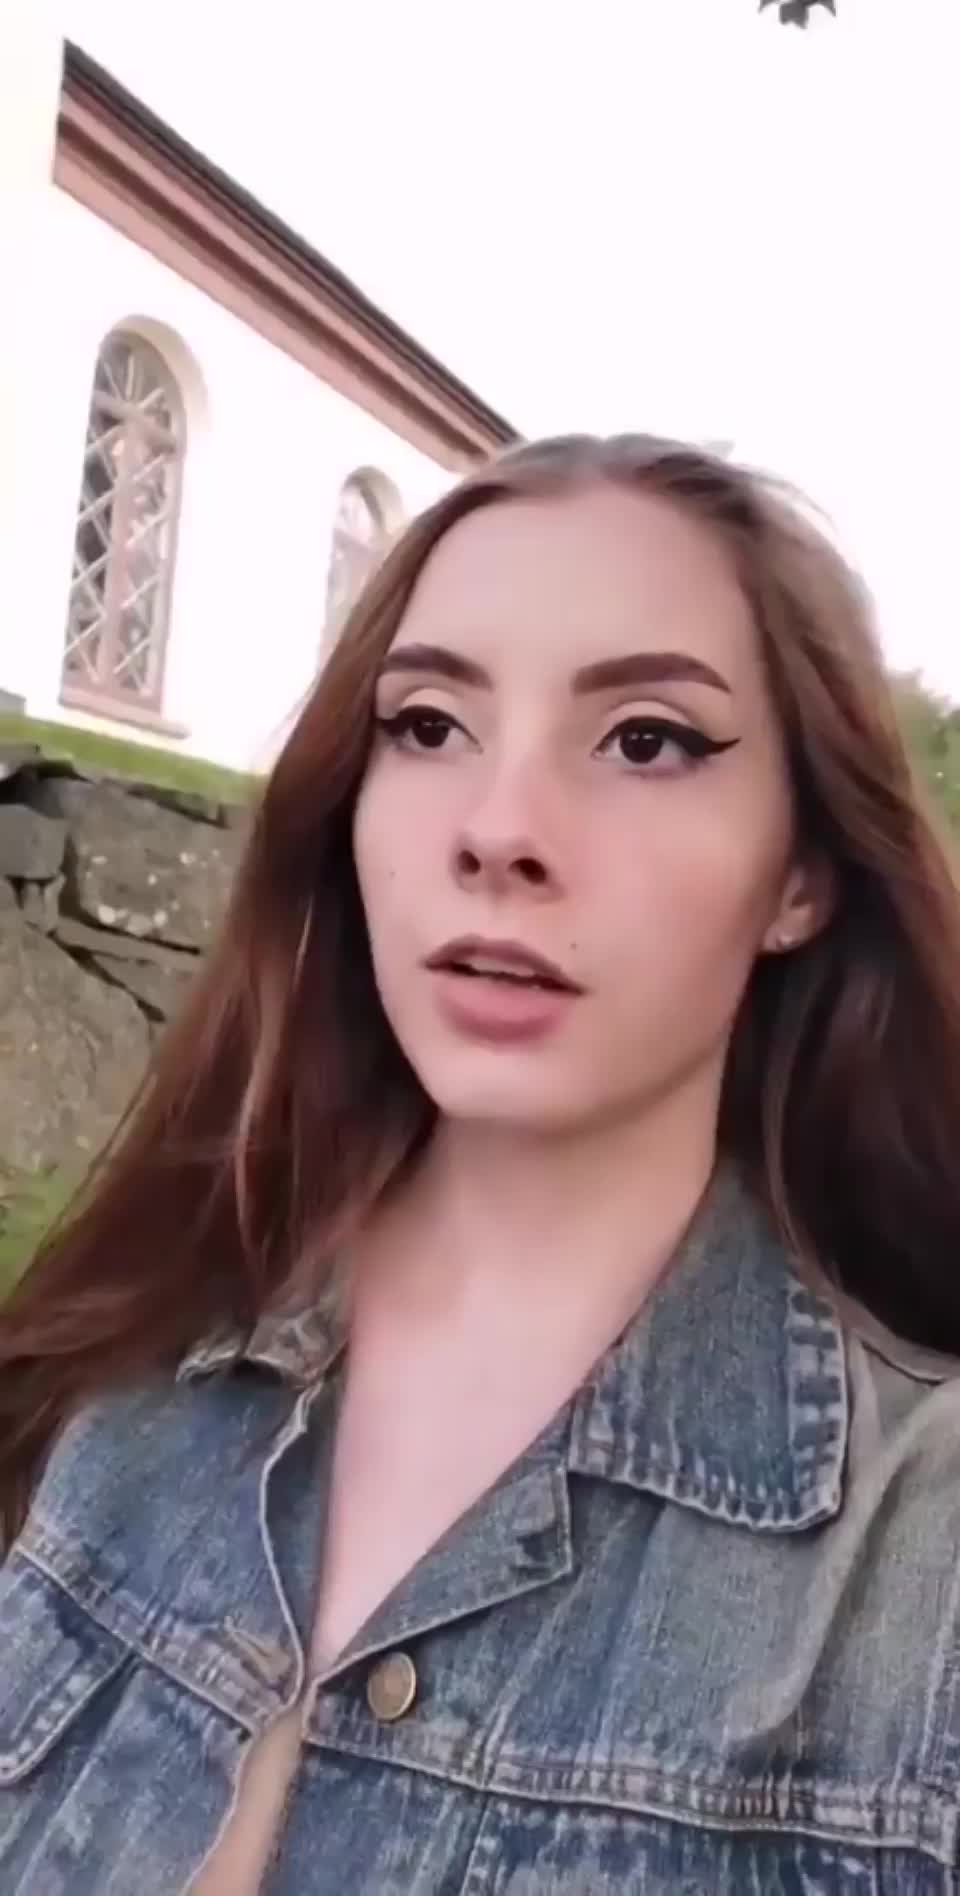 I'm probably going to hell for flashing my tits outside of church. Oh well! 😇 [GIF]